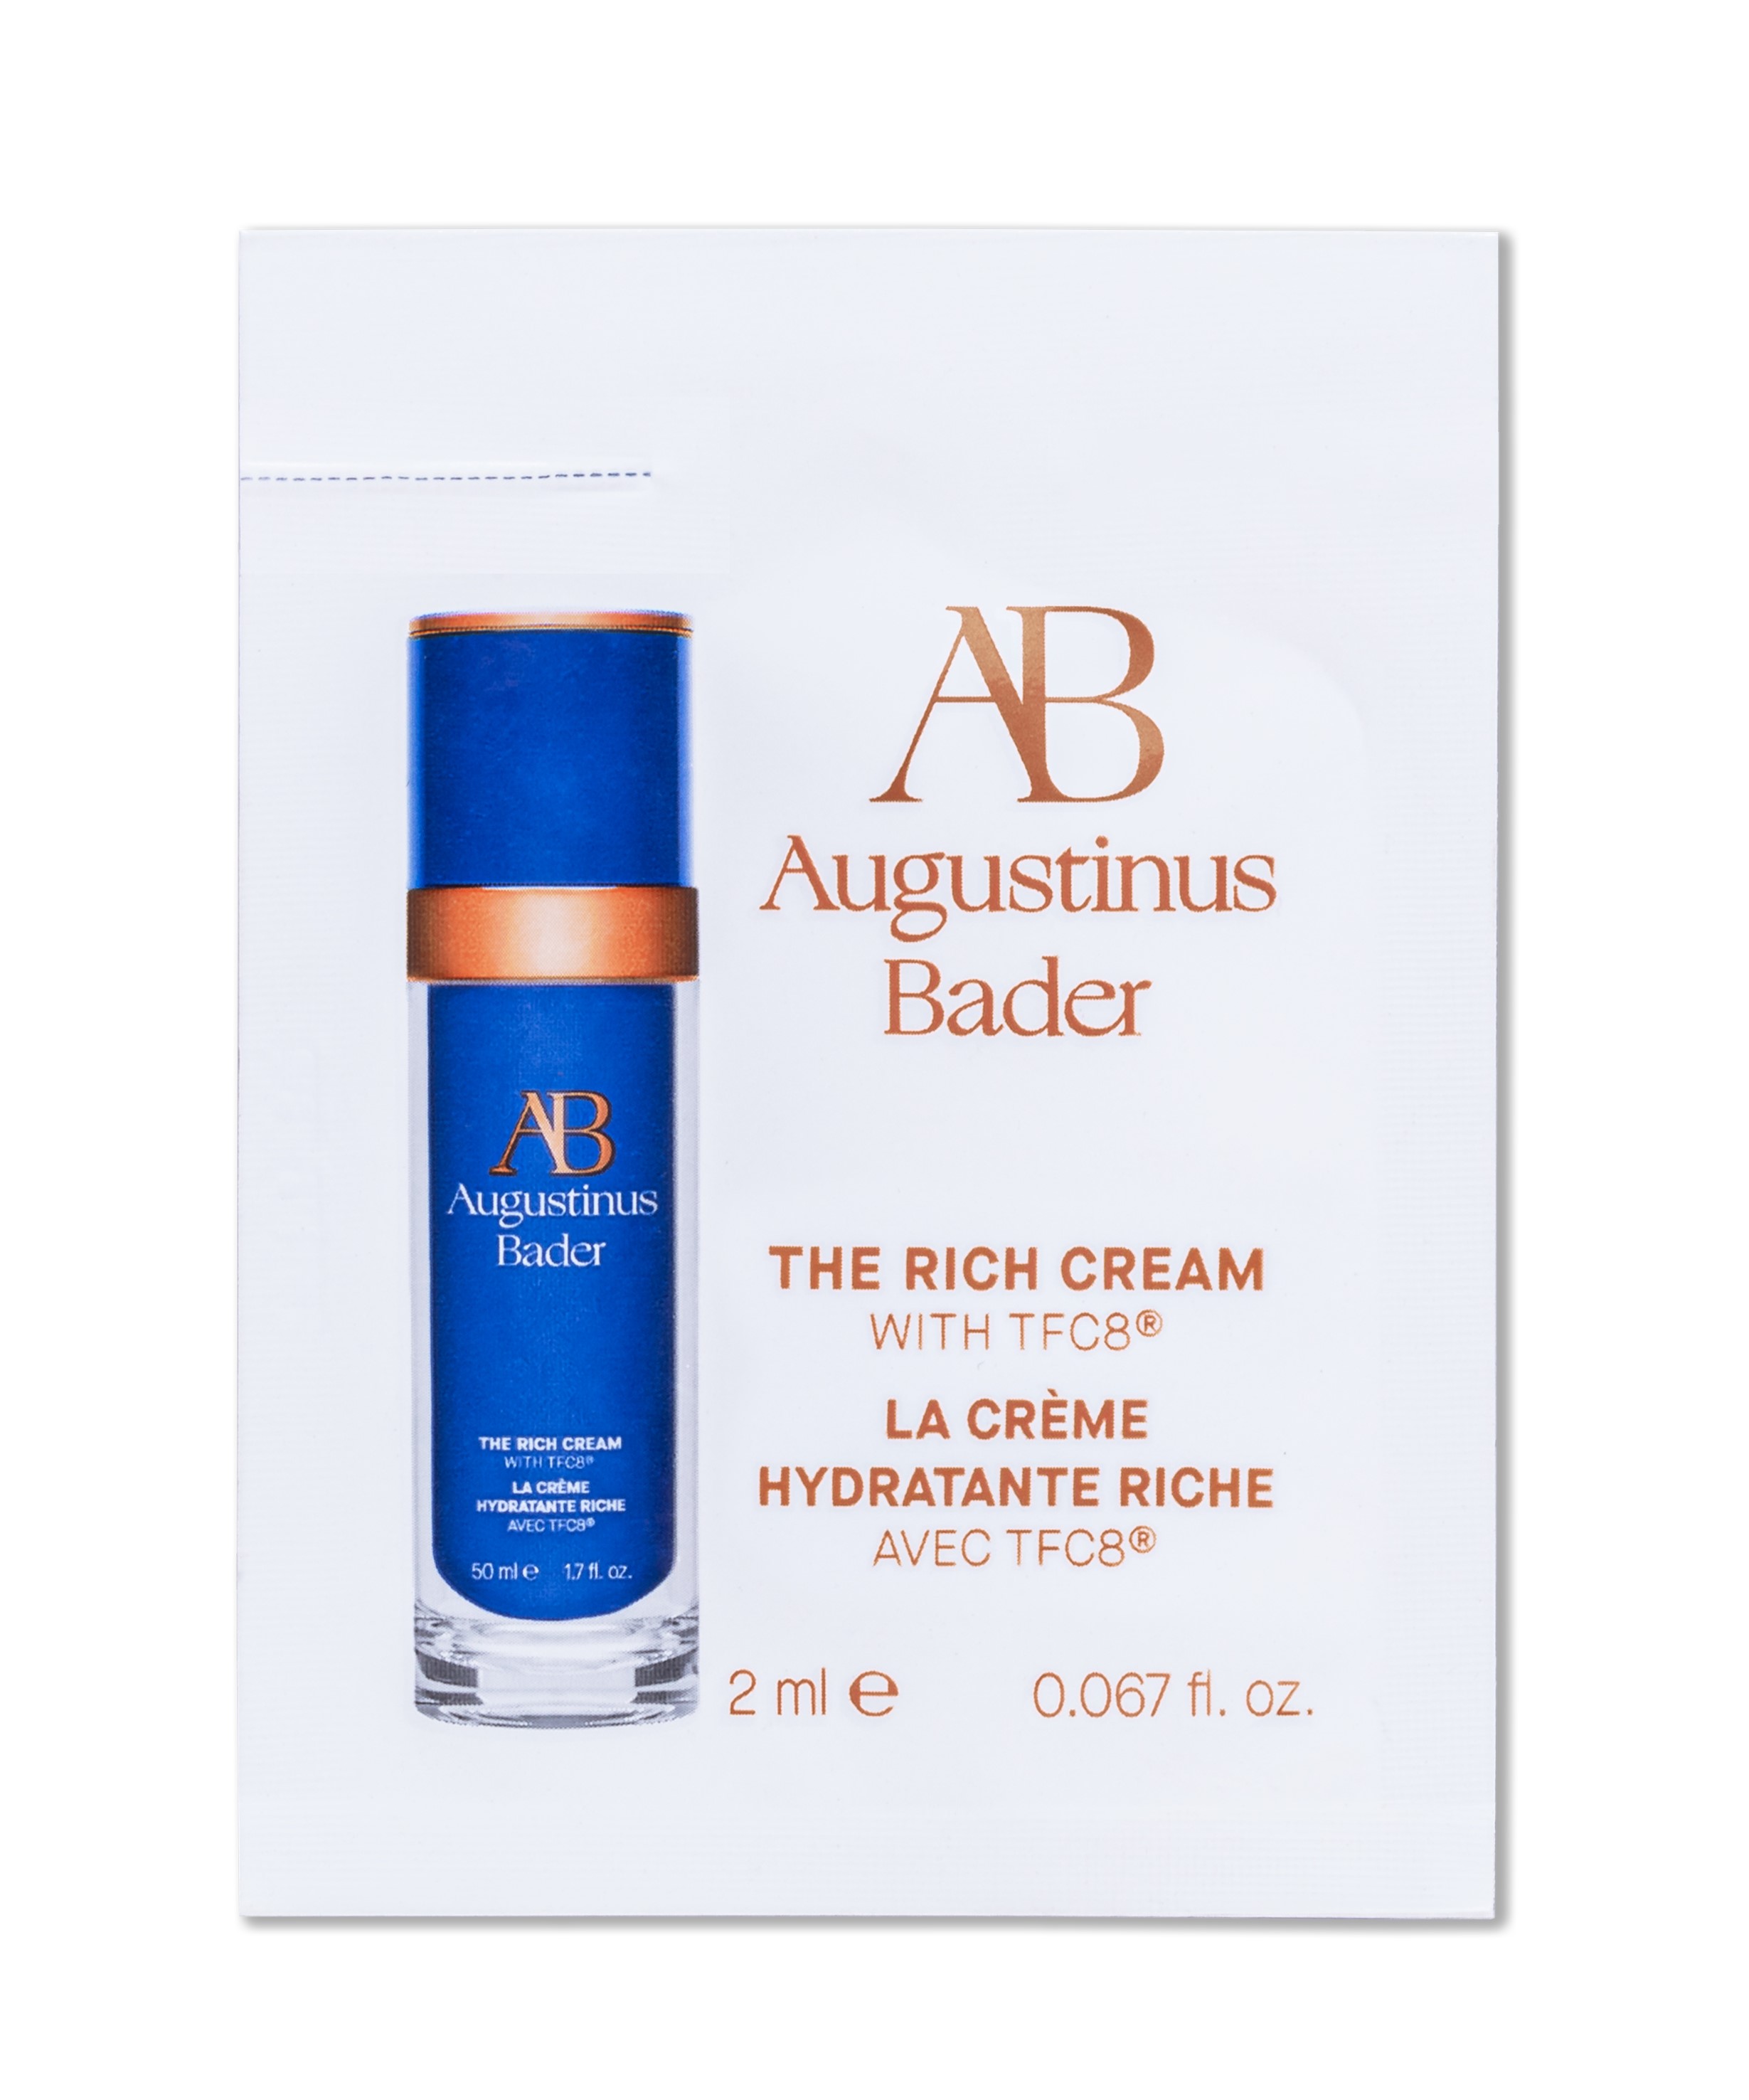 Purchase The Rich Cream And Receive Sample Size To Try